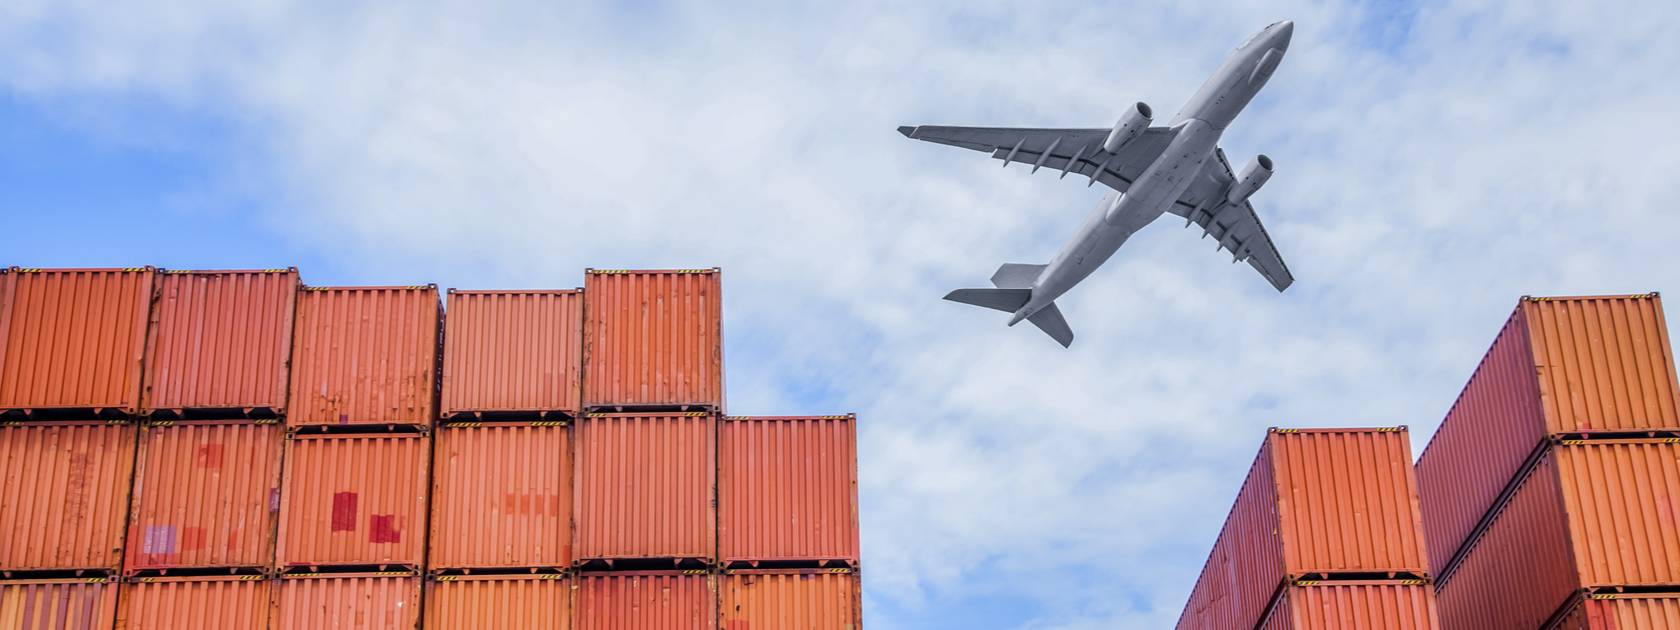 Cargo plane flying over shipping containers 